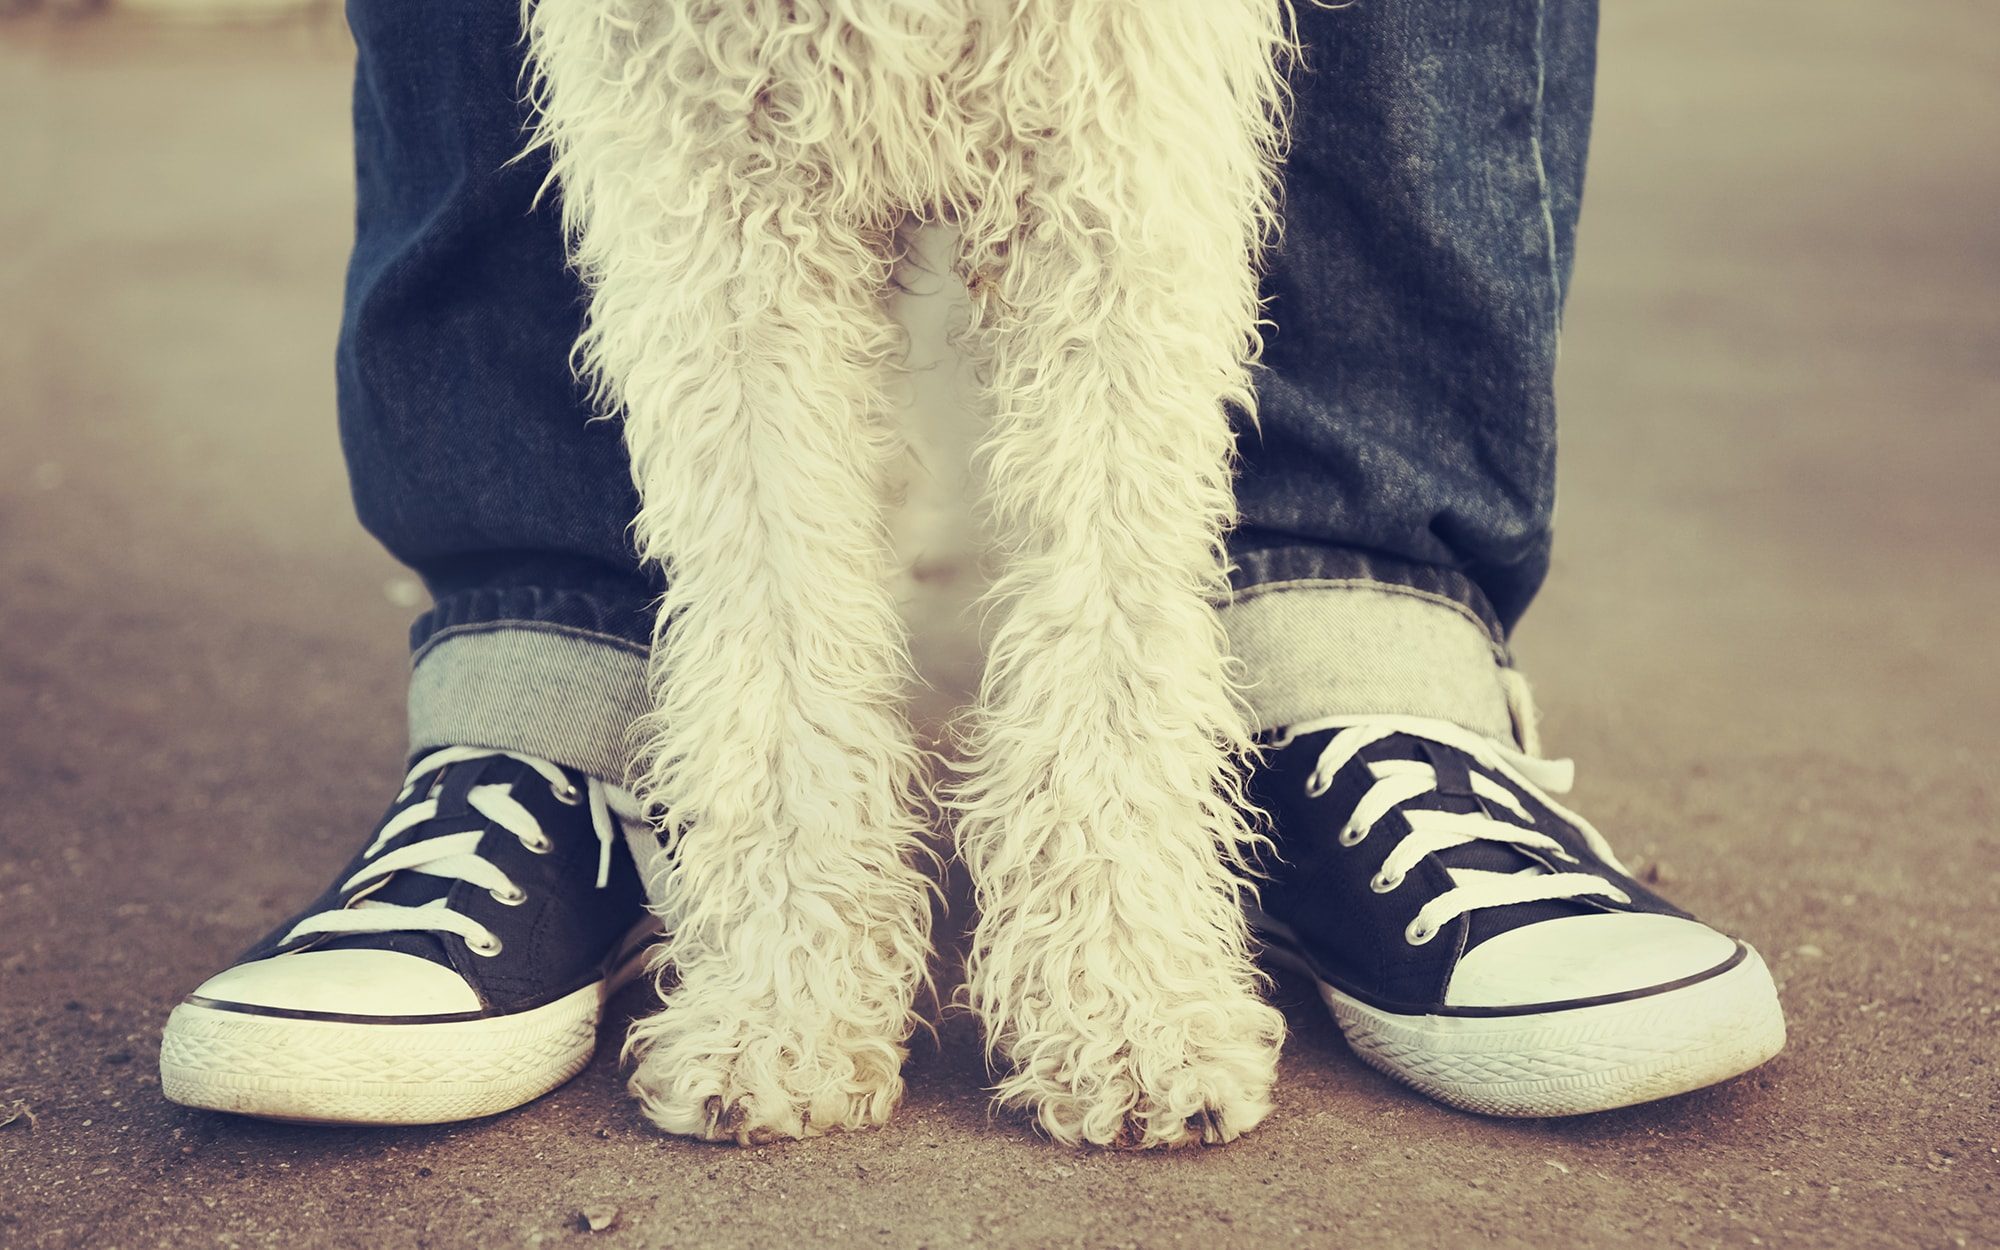 Dog standing between legs of person wearing skate shoes